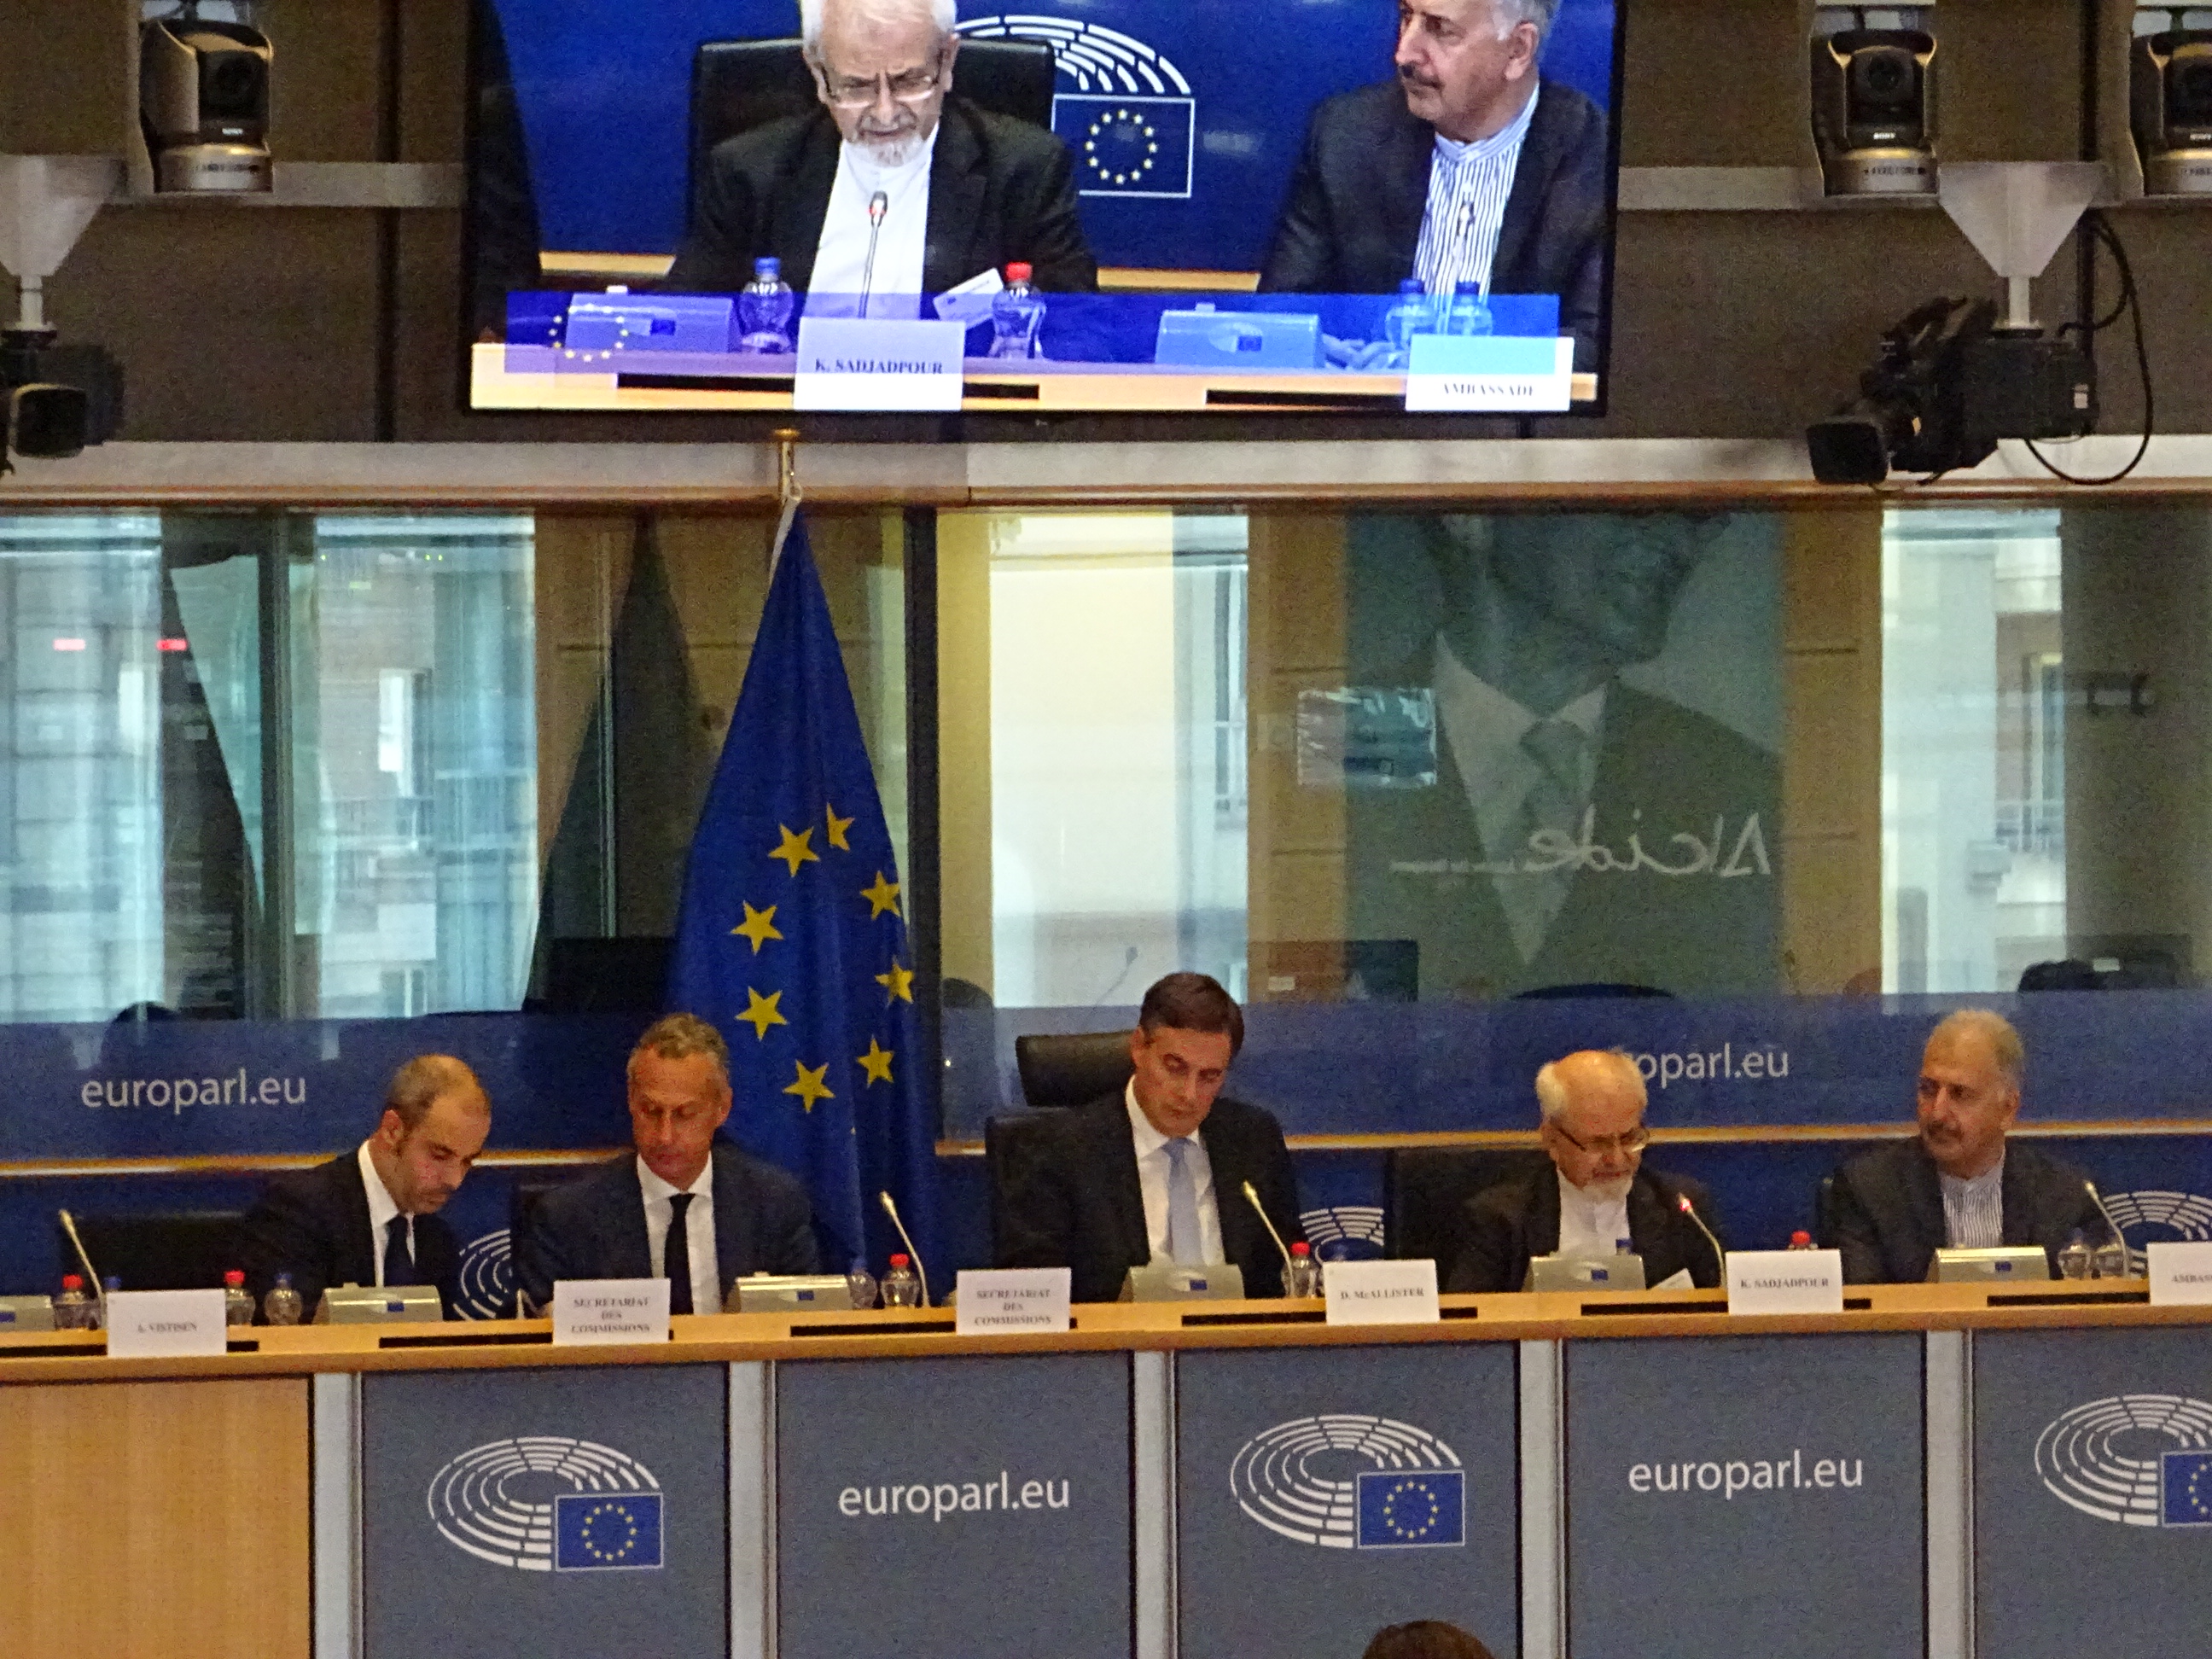 Dr. Kazem Sadjadpour, Deputy Foreign Minister of Iran, speaking in the EP